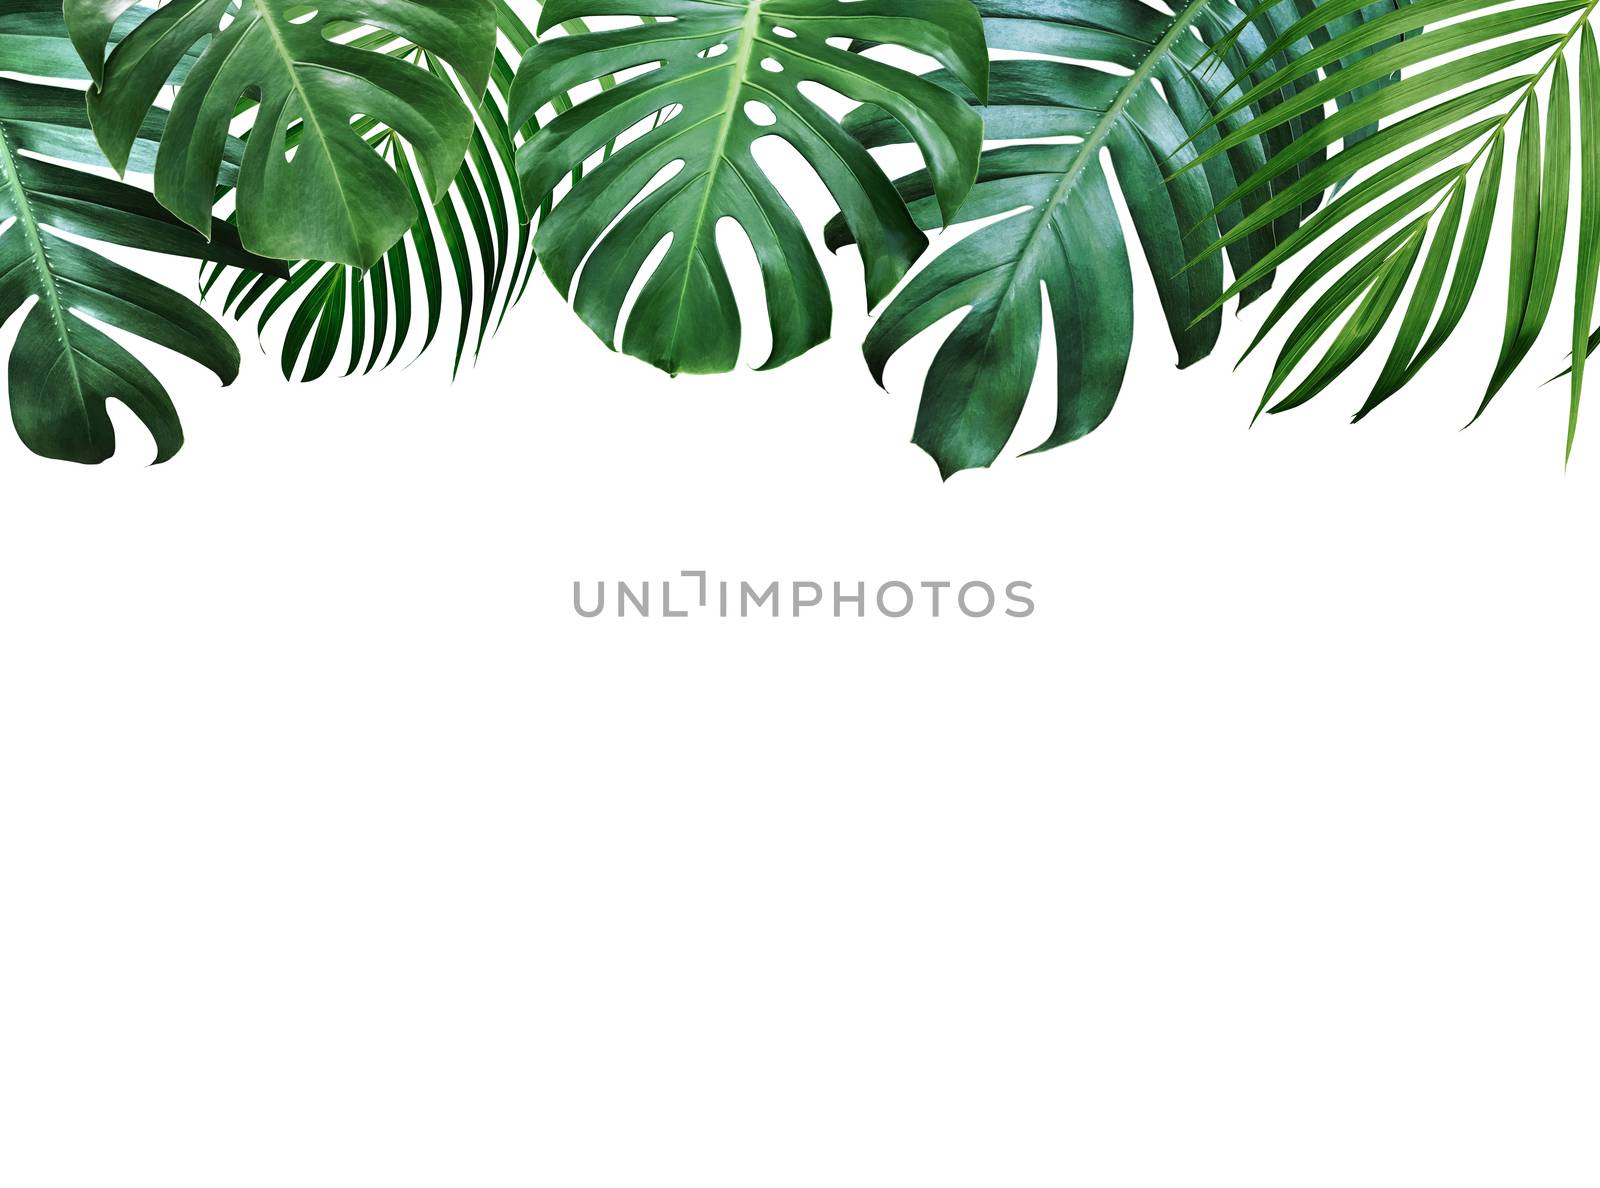 Summer tropical leaves on white background with copy space